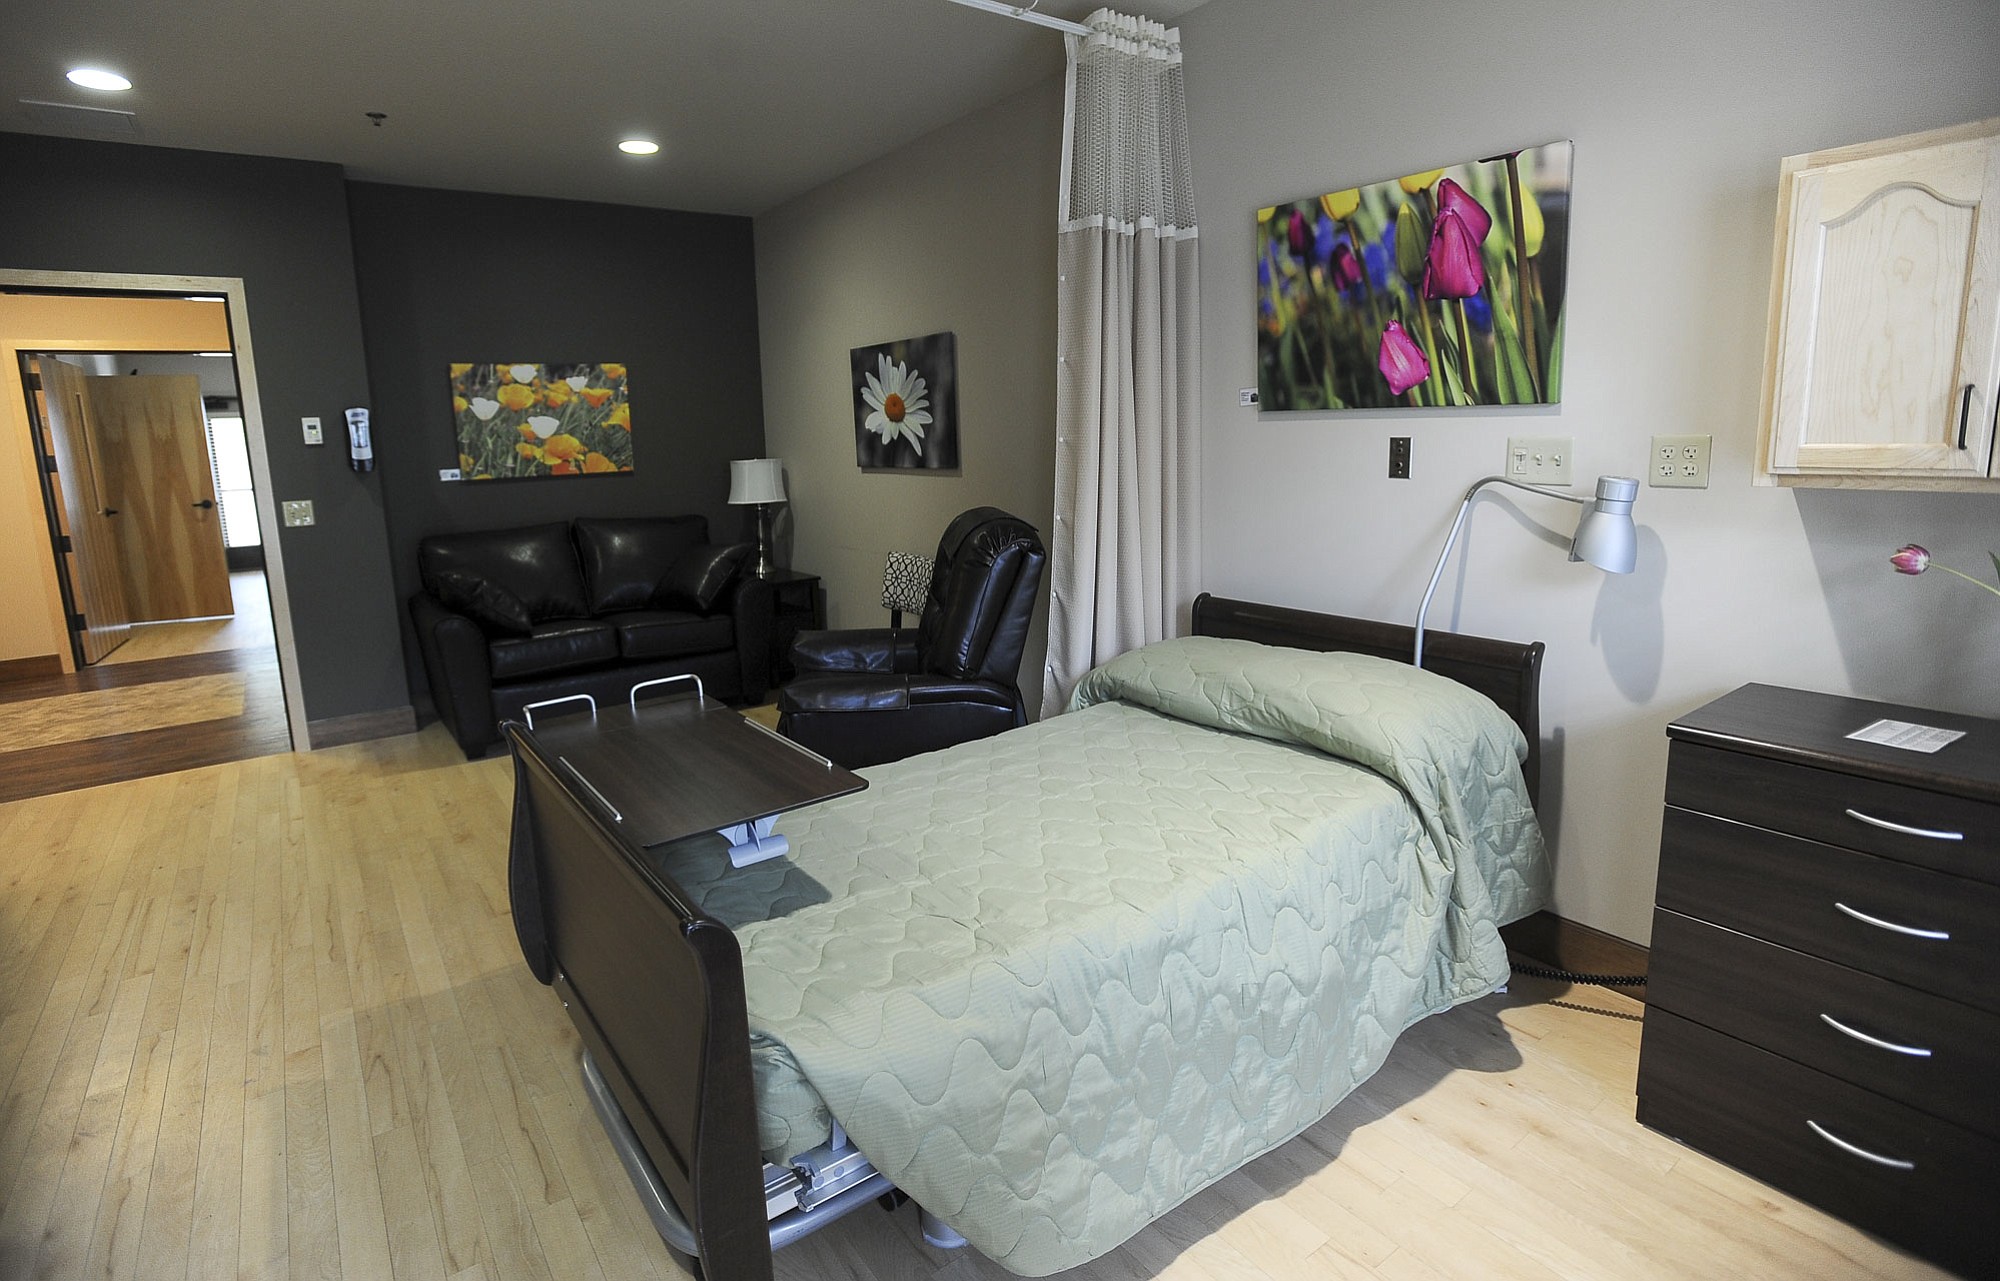 Patient rooms are large at the new 10-bed Community Home Health &amp; Hospice in Vancouver, which is hosting a community open house on Friday.